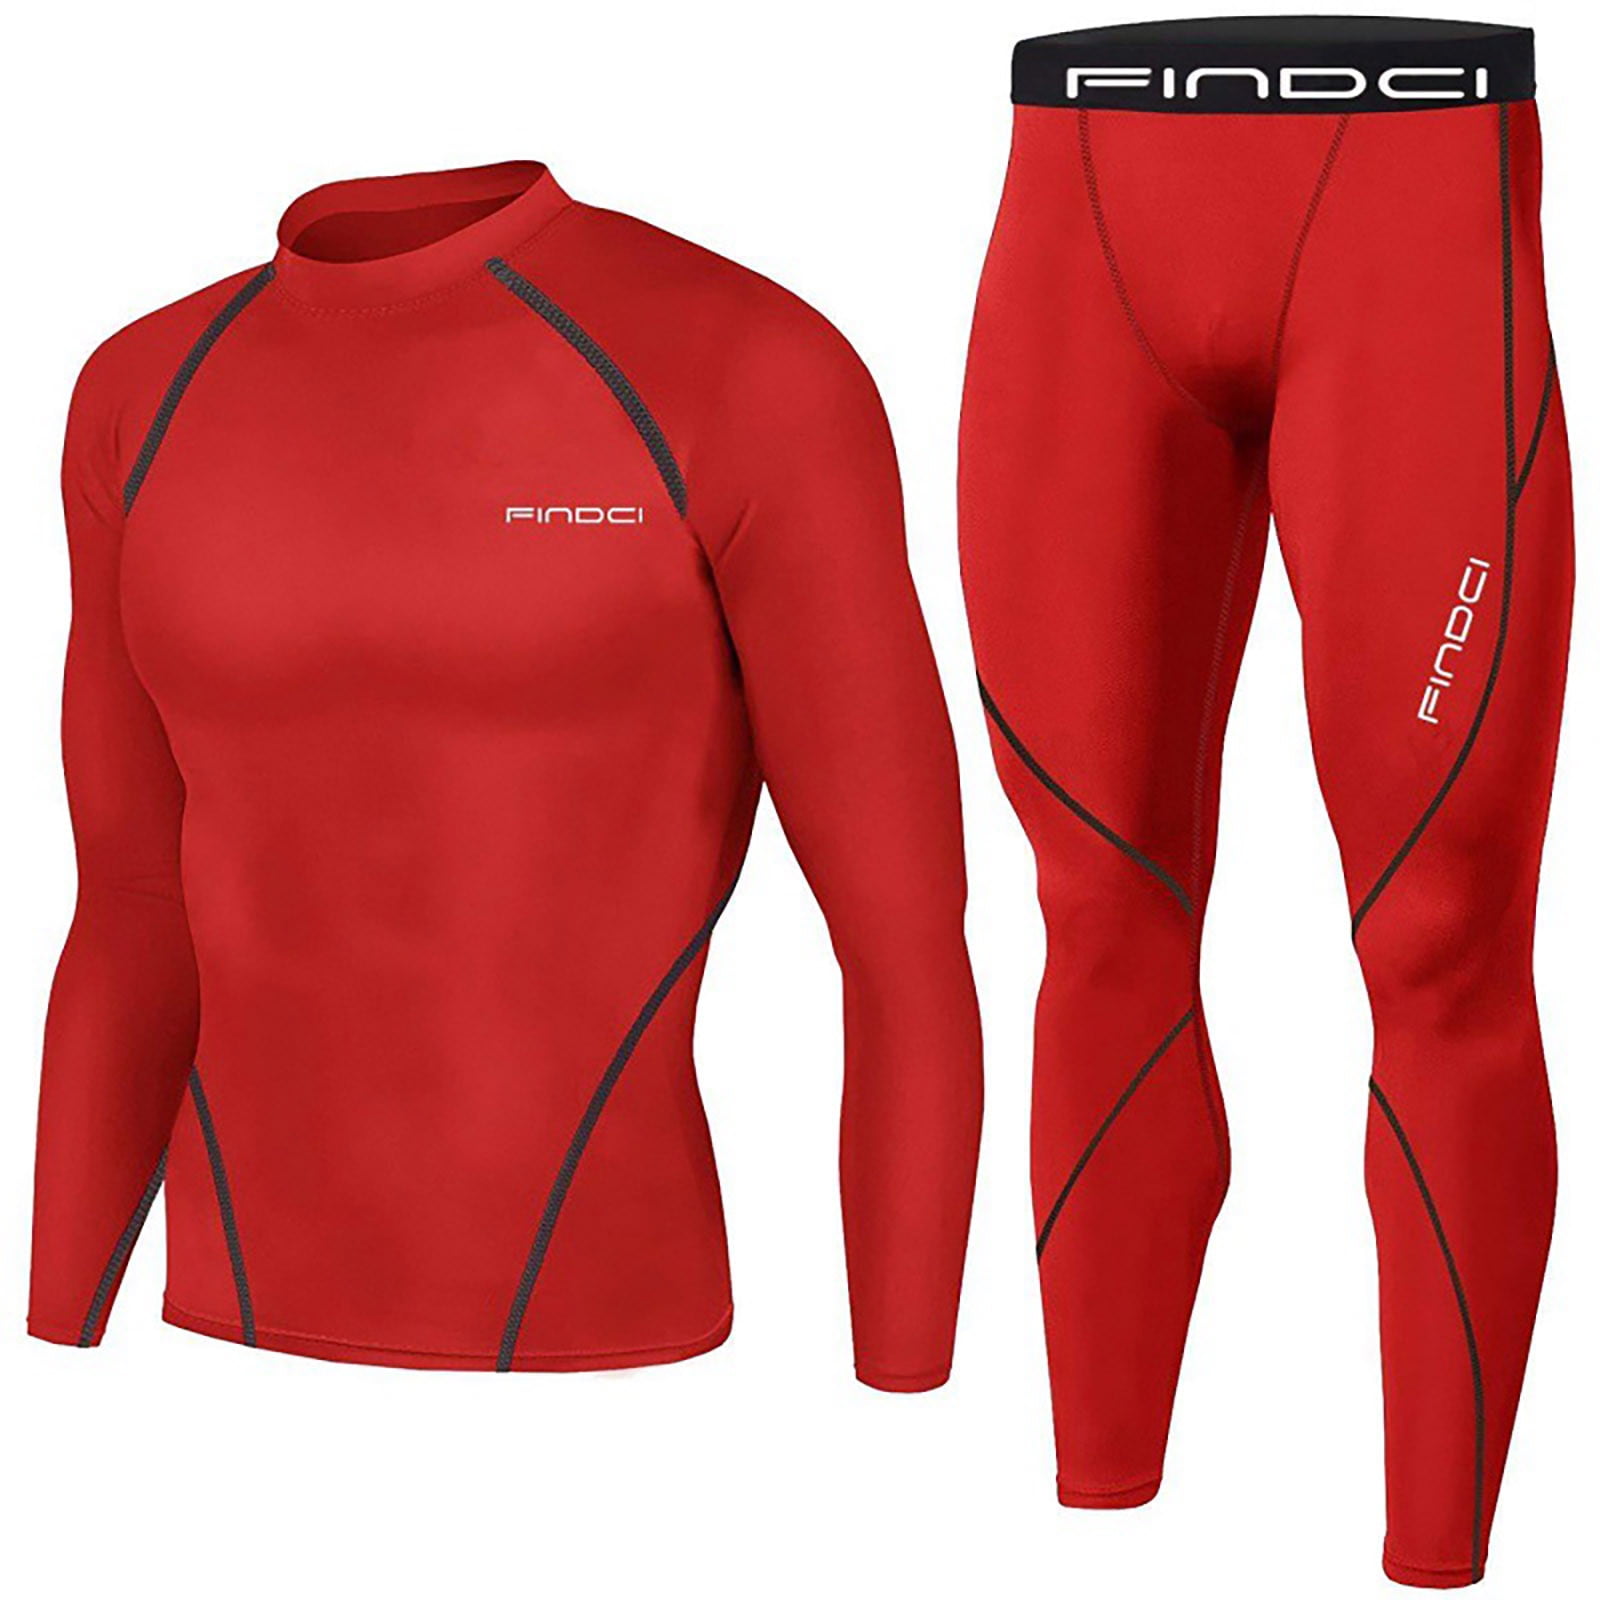 Men's Sports Running Set Compression Shirt and Pants Skin-Tight